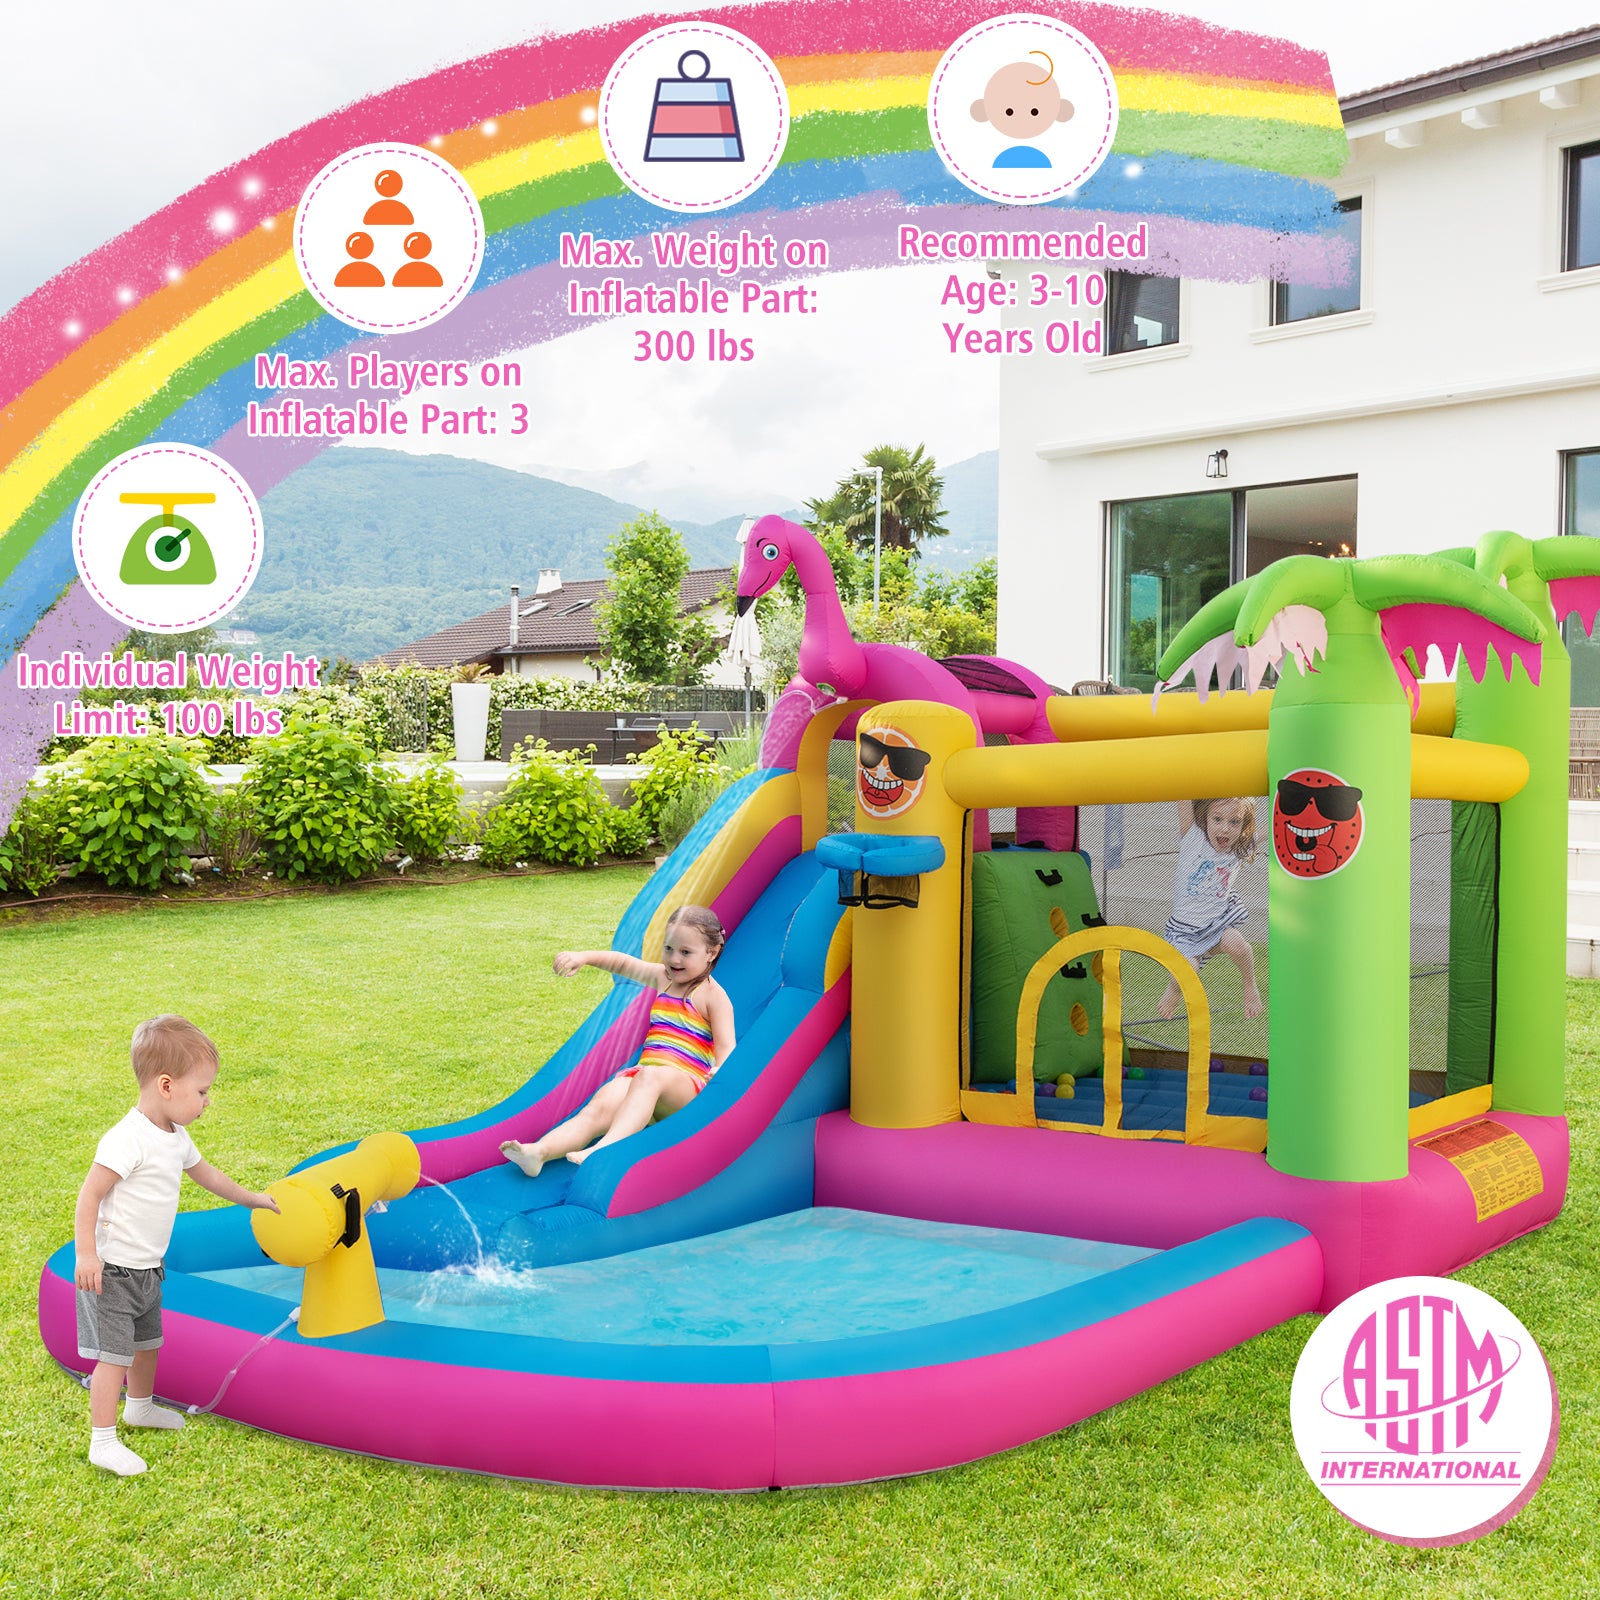  The perfect gift for kids: This giant tropical-themed bouncy castle offers a large inflatable area where up to 3 kids aged 3-10 years old (each weighing under 100 lbs) can play simultaneously. It's sure to be a big hit at birthday parties or during summer vacations, creating lasting memories for your little ones.